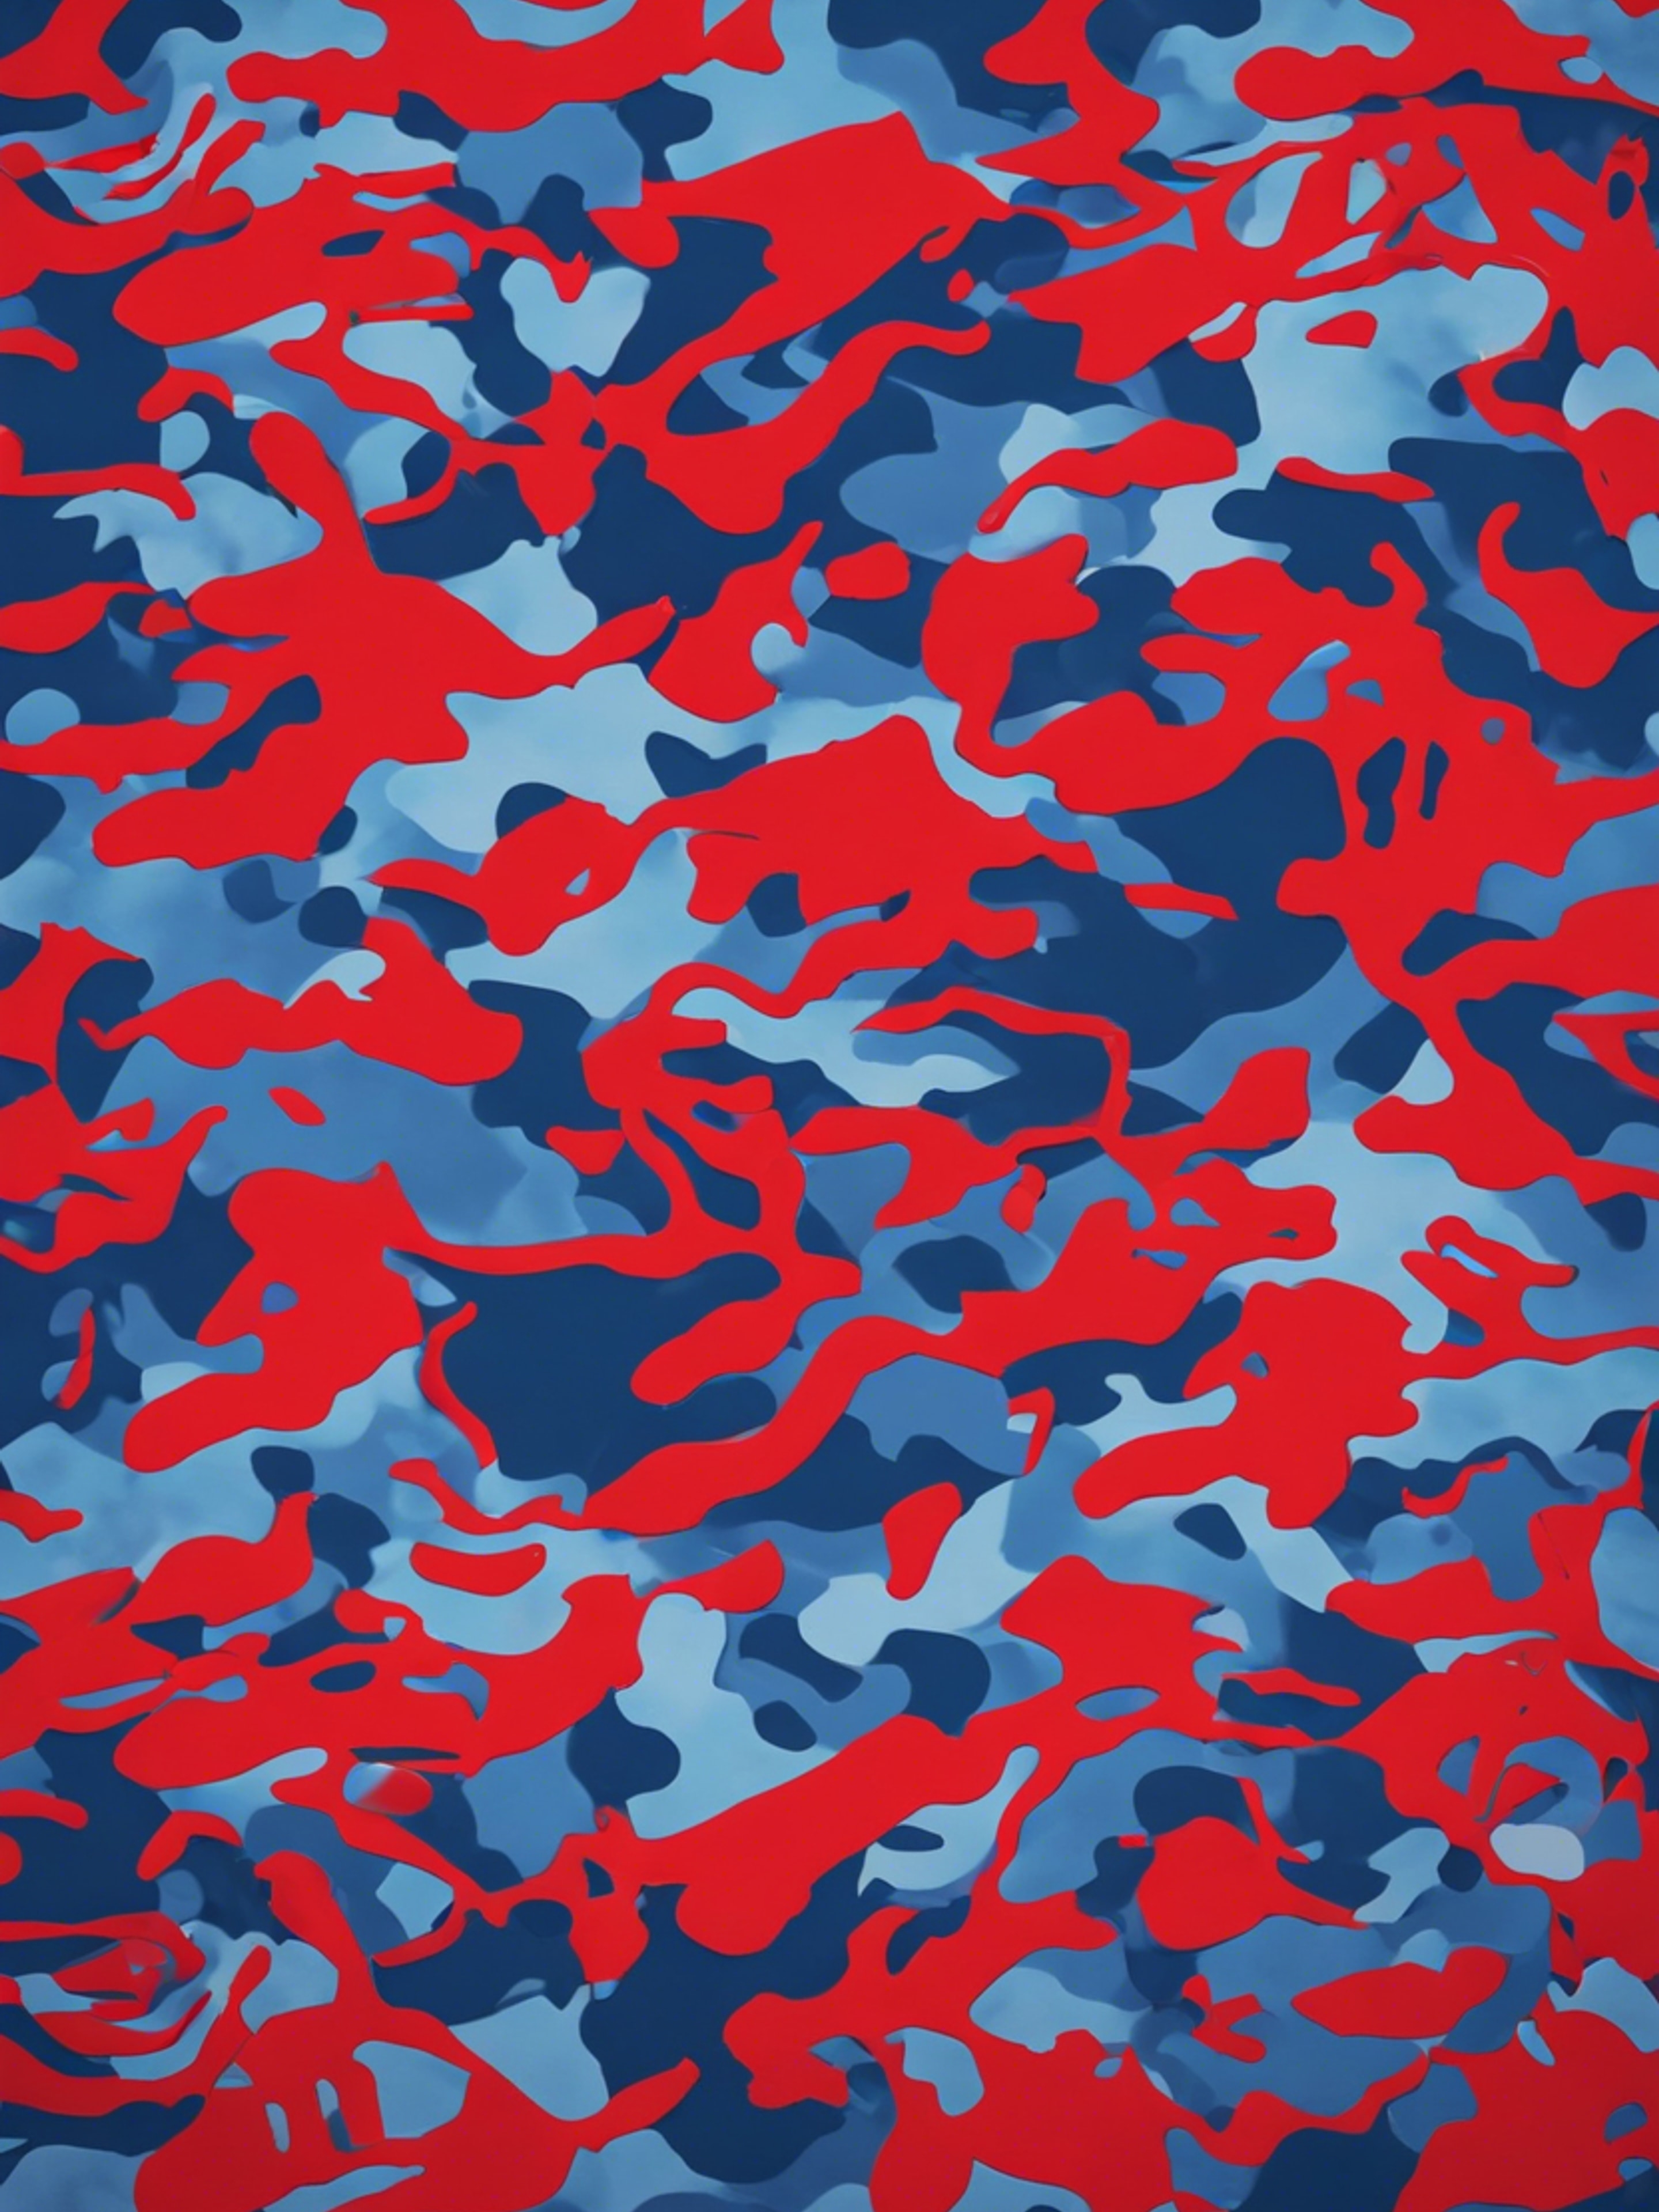 Vintage styled red and blue camouflage pattern. Tapeta[fee228e6ab6649a28dfc]